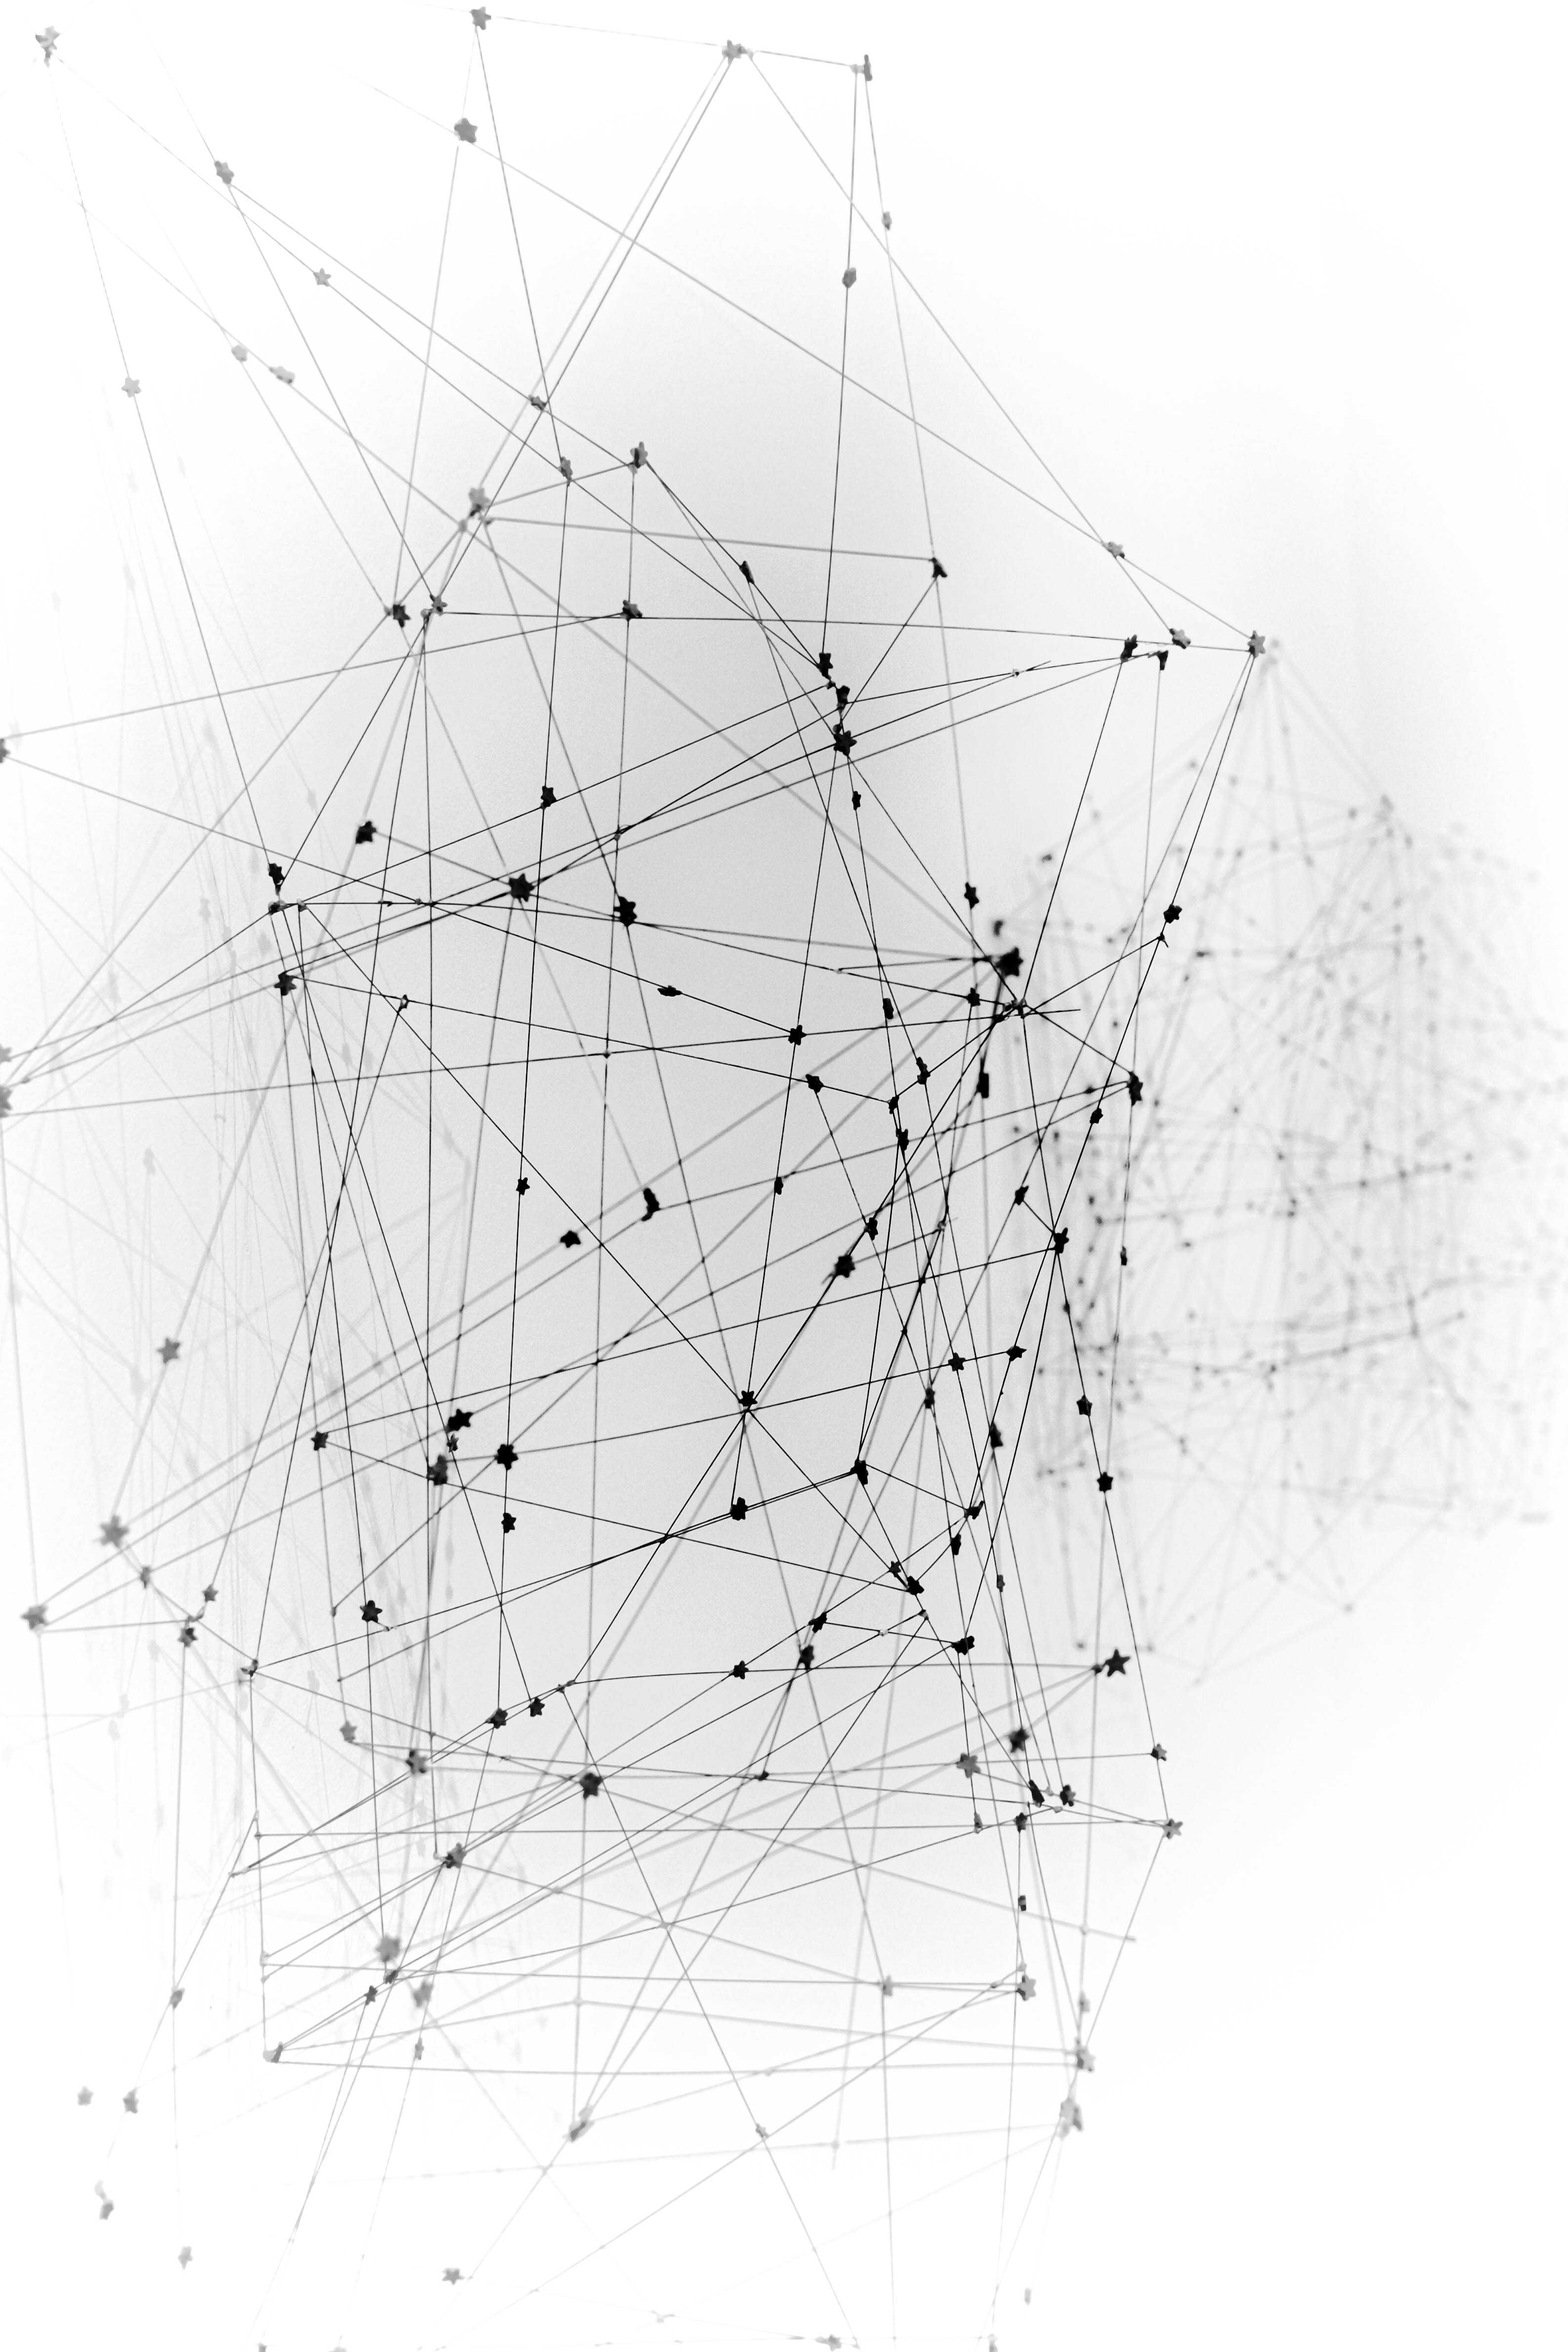 Image for /graph-databases/